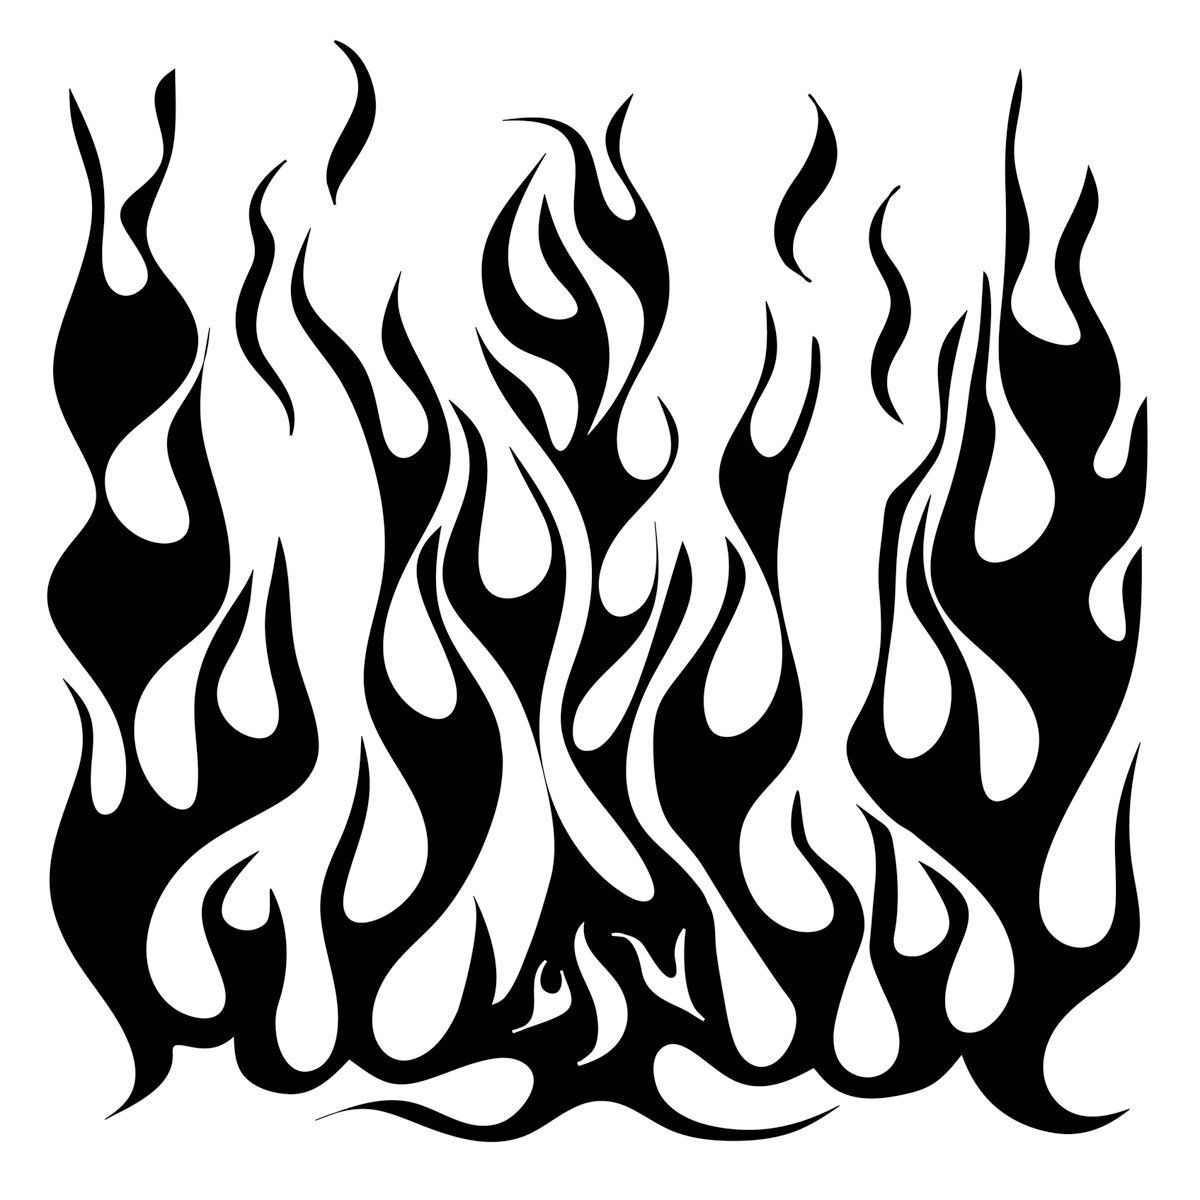 The Crafters Workshop Mini Flames 6 x 6 inch